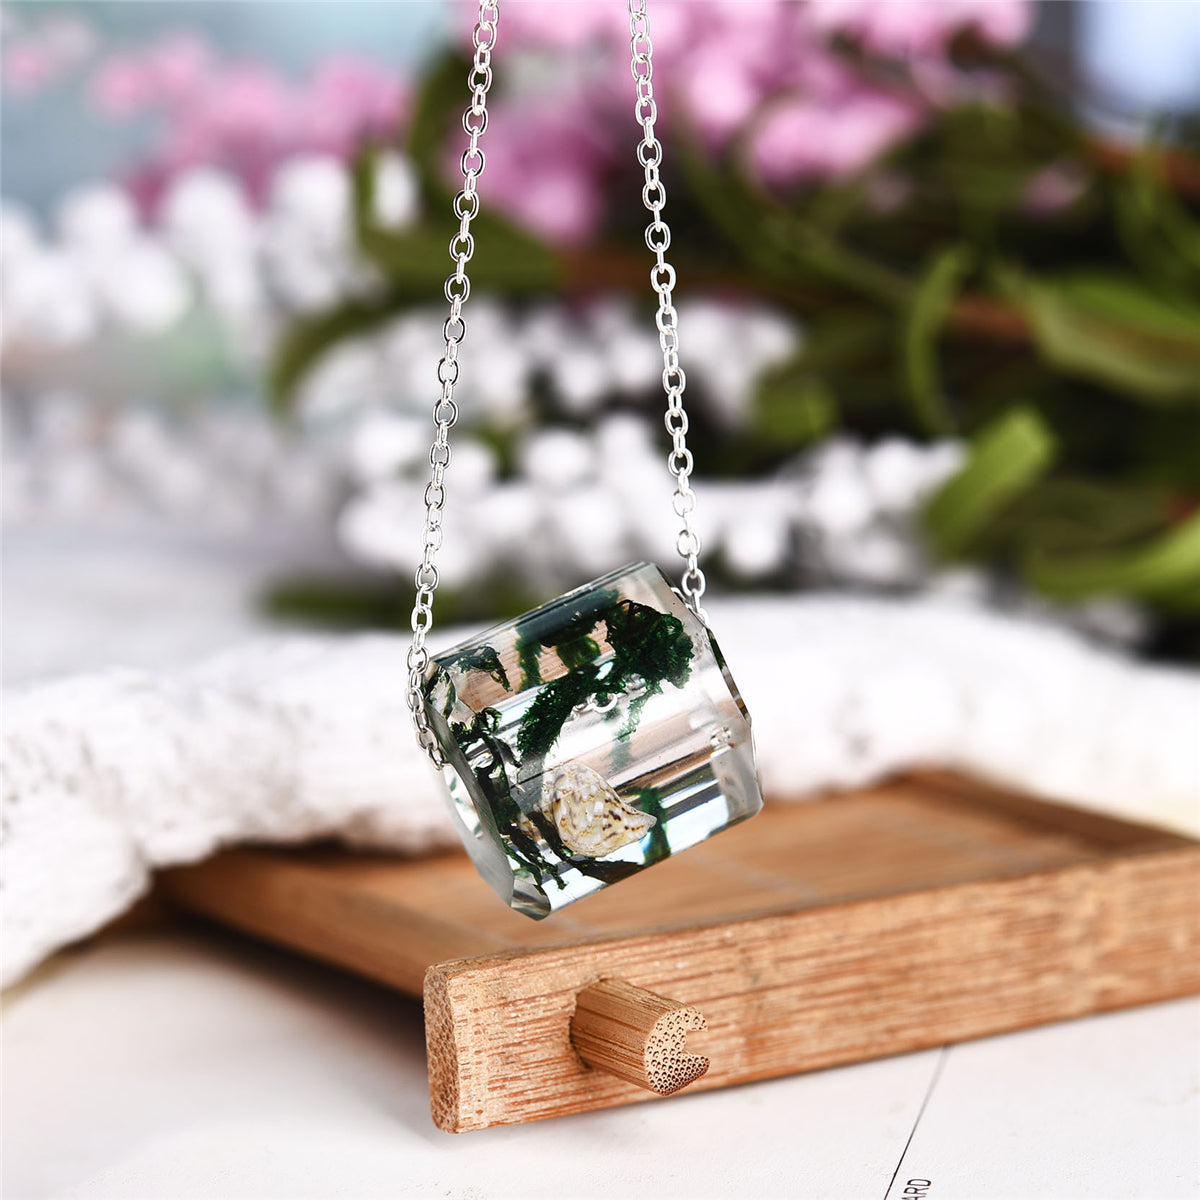 Dark Green Dried Algae & Silver-Plated Cylinder Pendant Necklace